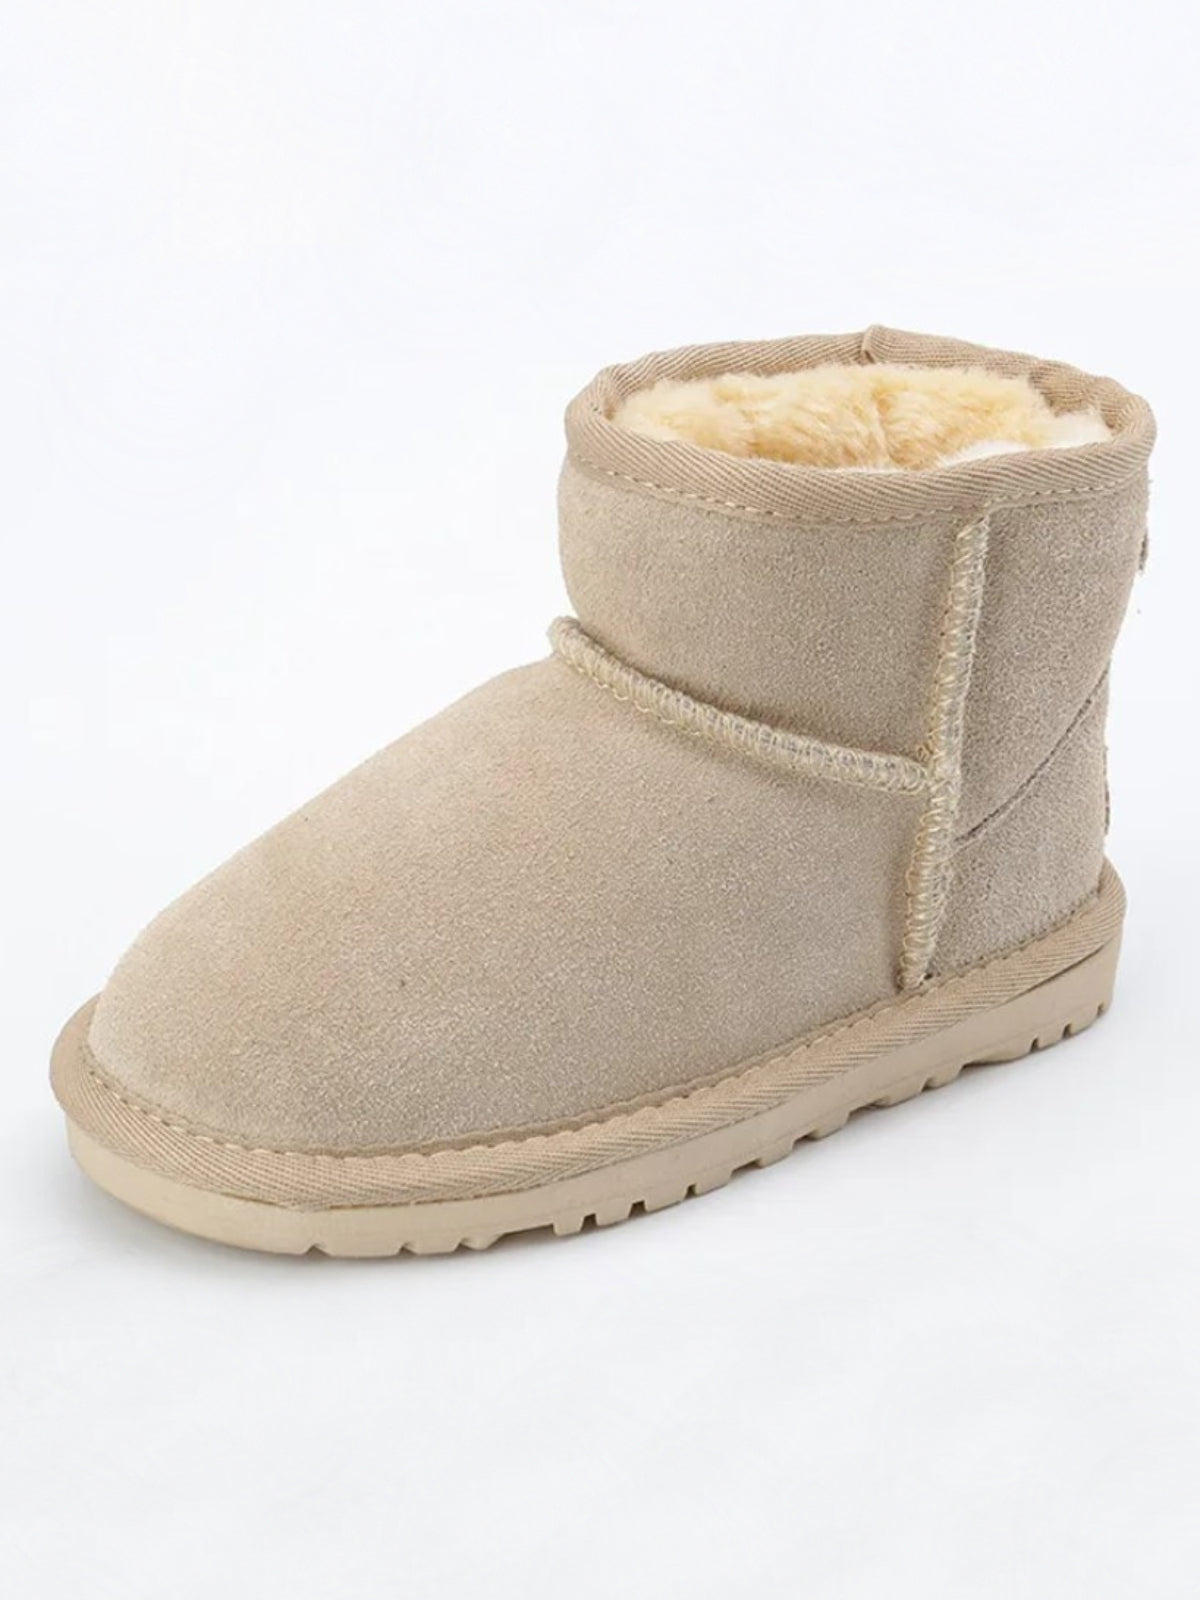 Mia Belle Girls Suede Boots | Shoes By Liv & Mia